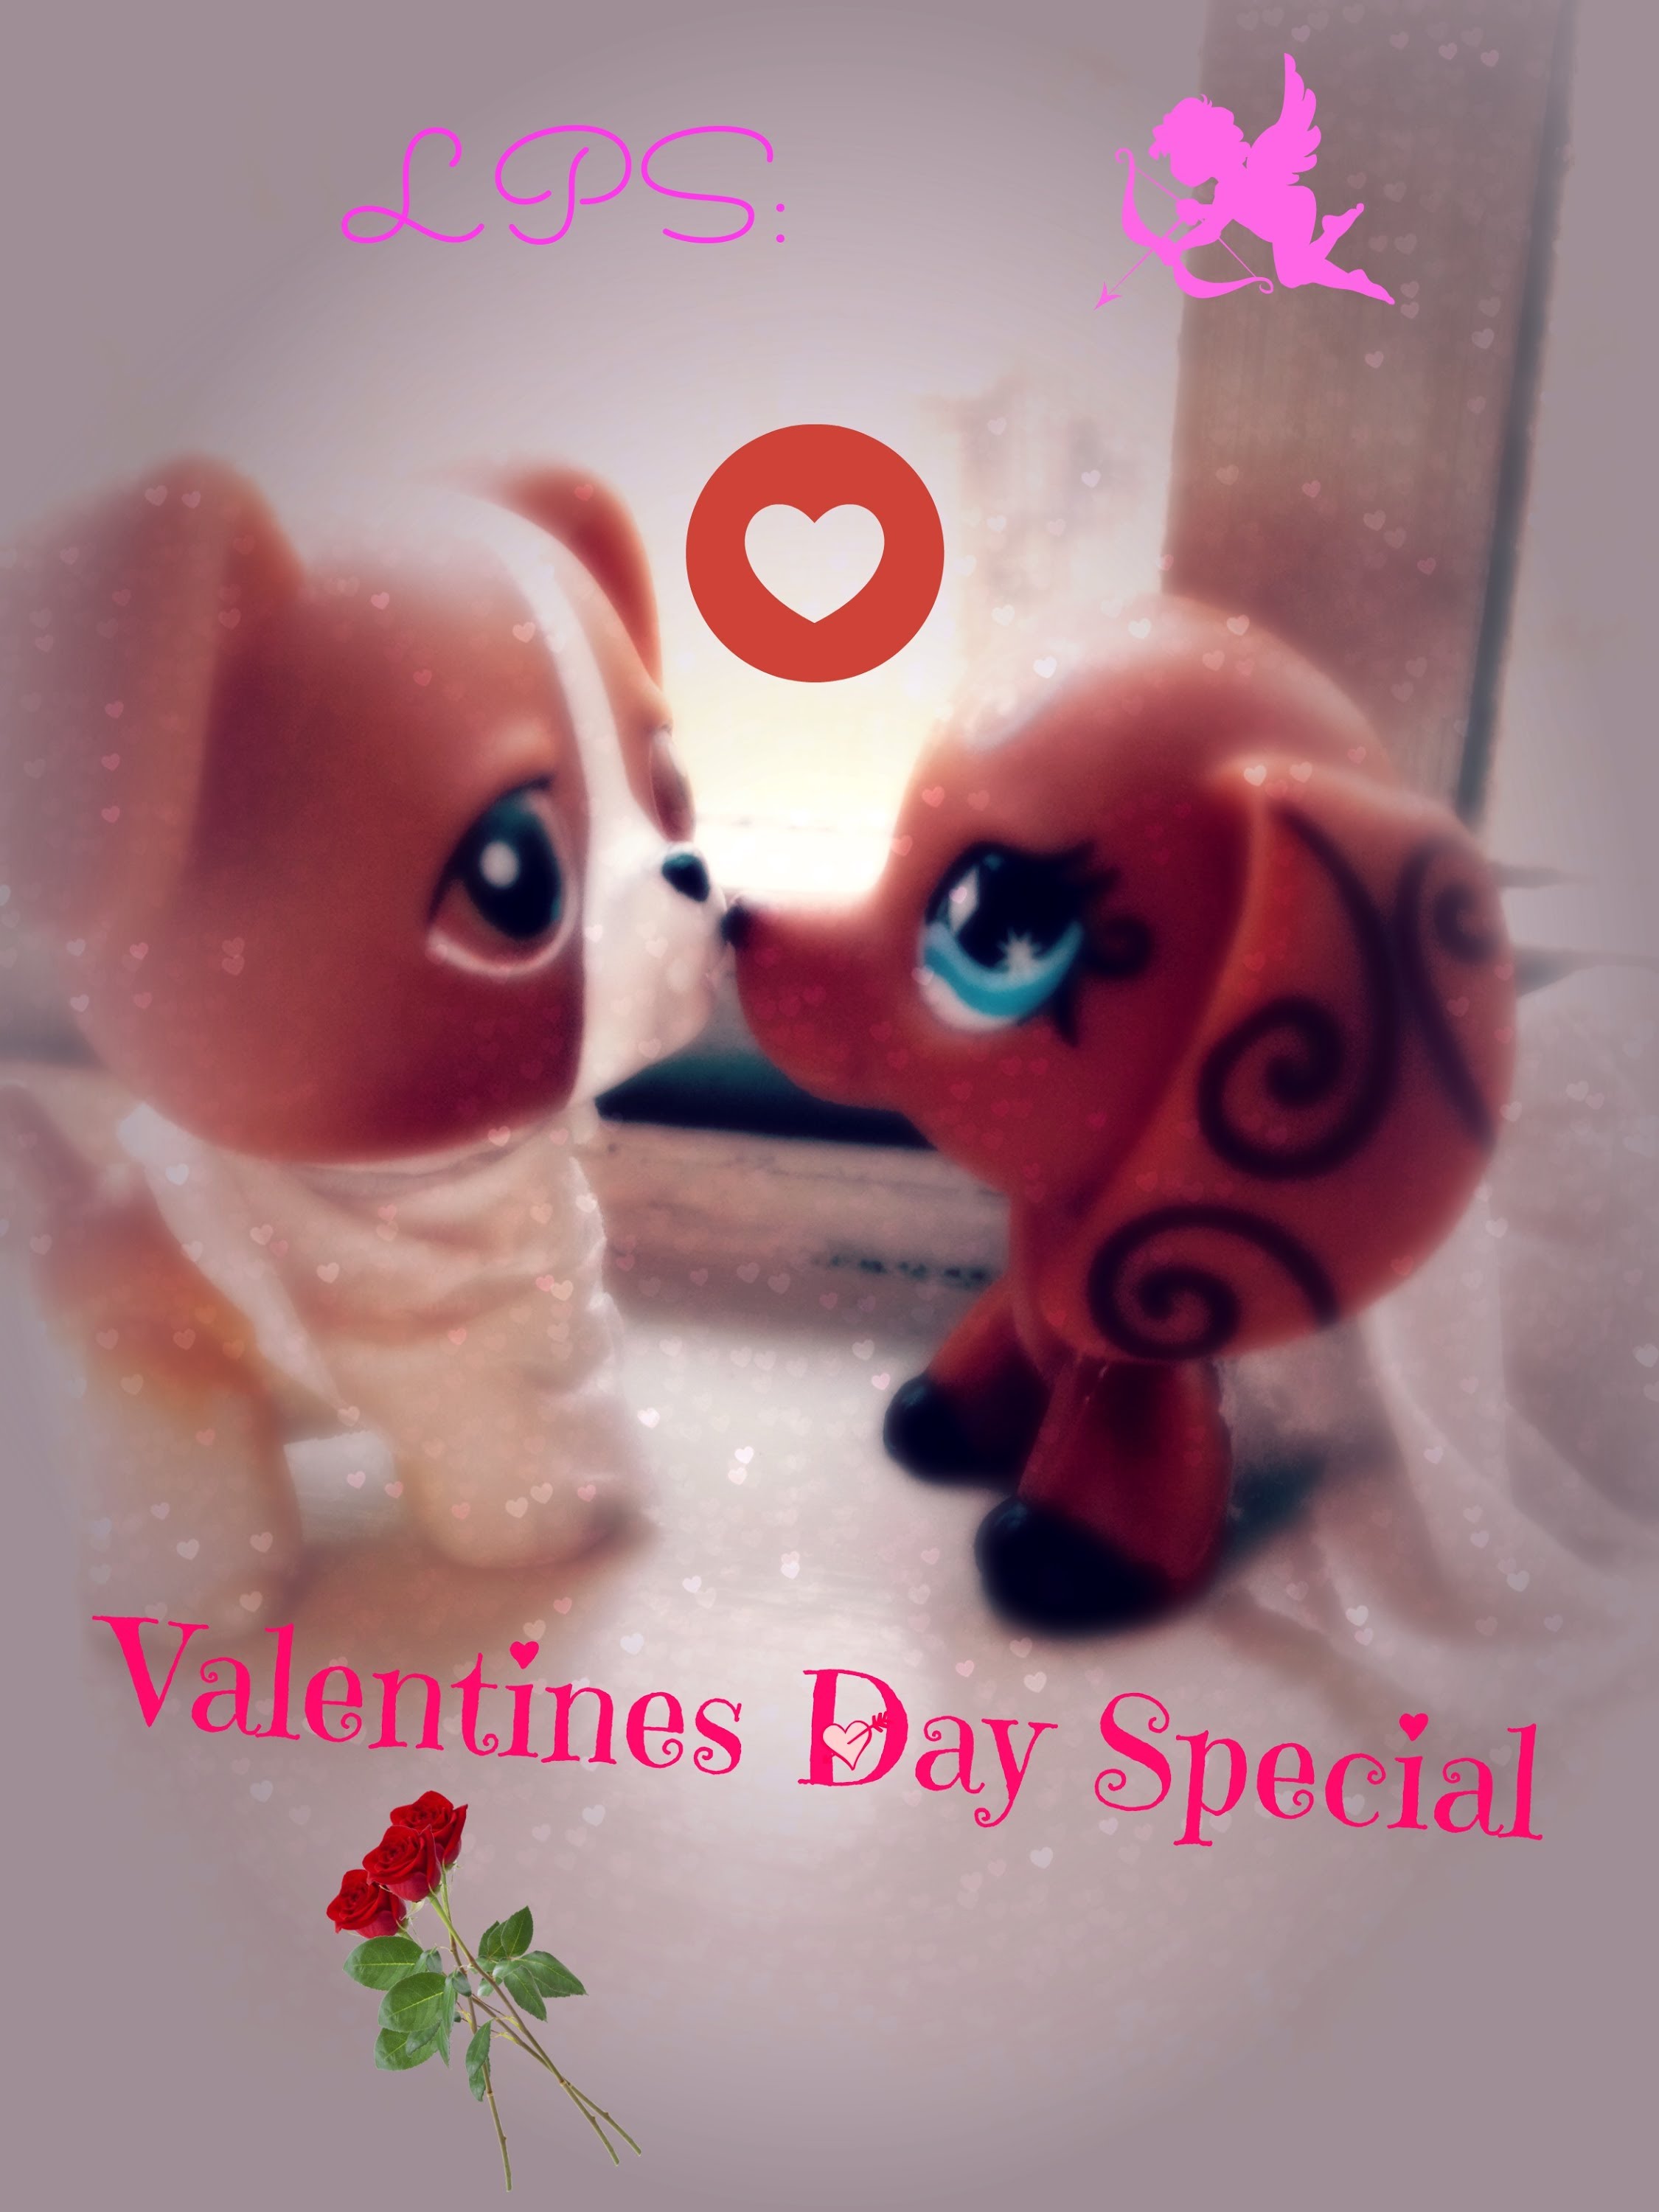 Lps Valentines Day Special Late Series Off This Loyal Hearts